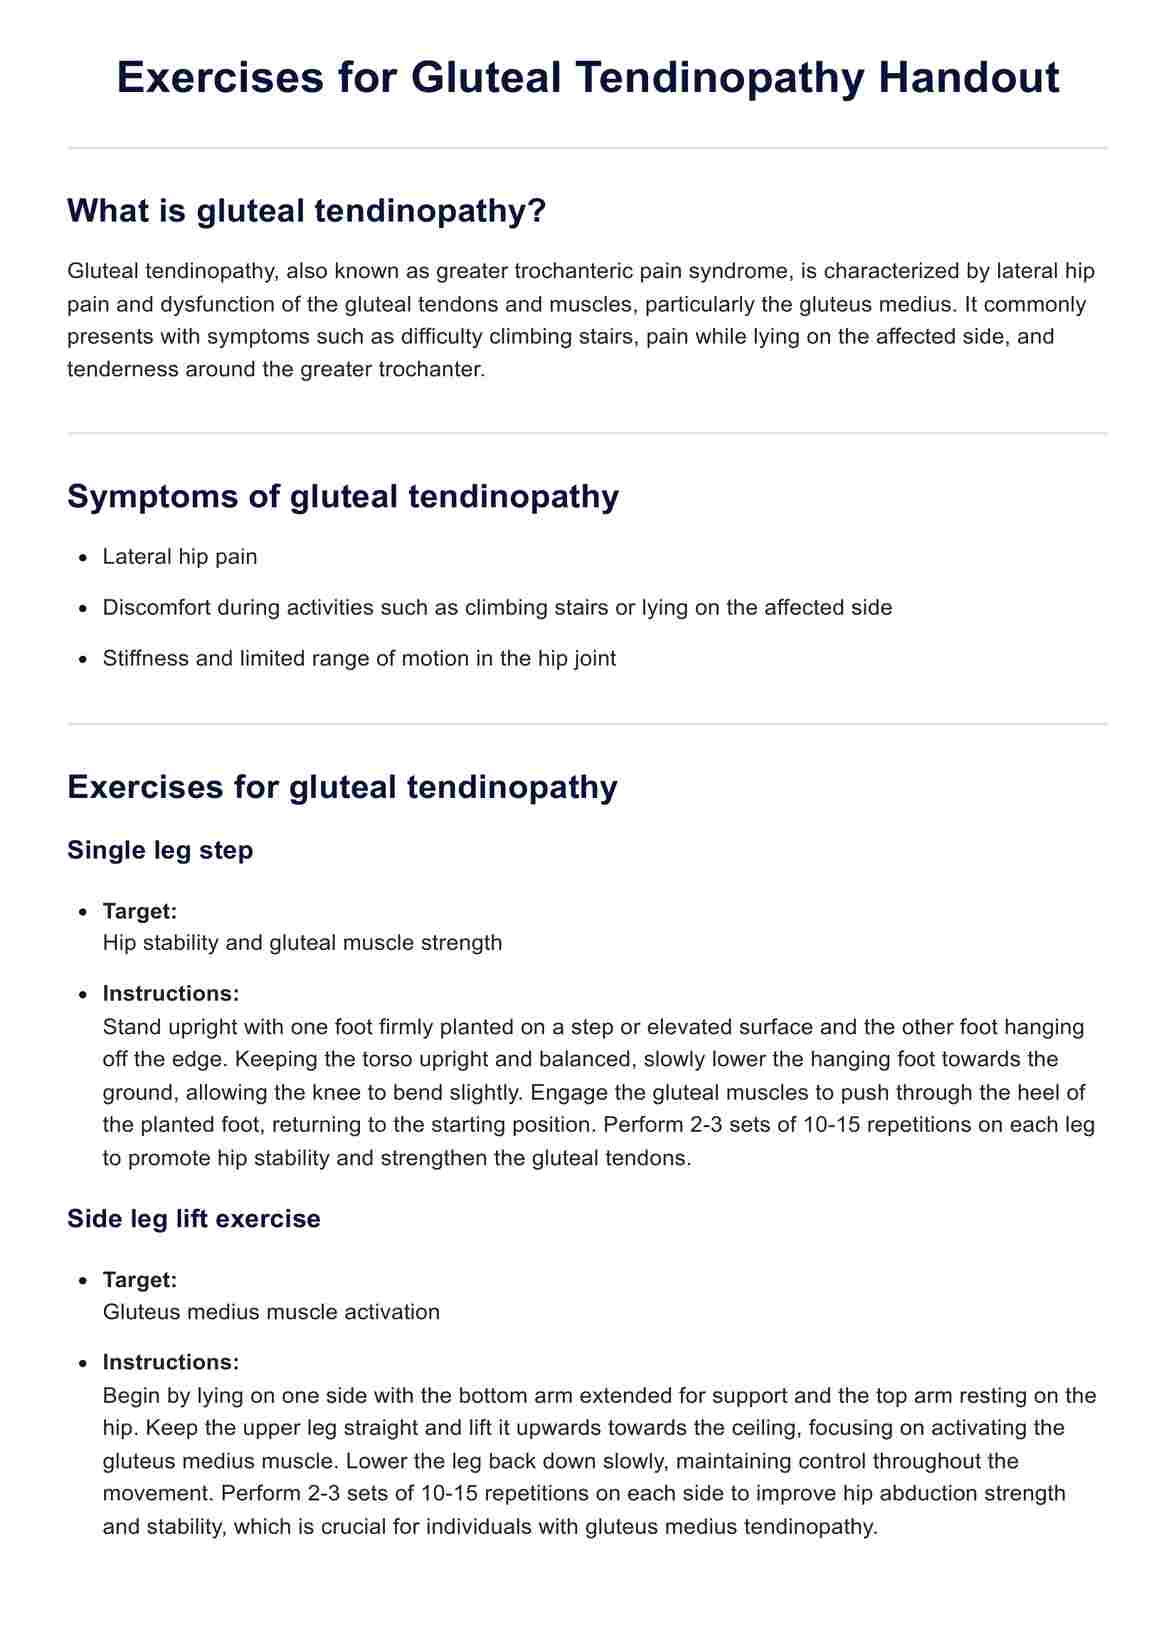 Exercises for Gluteal Tendinopathy Handout PDF Example